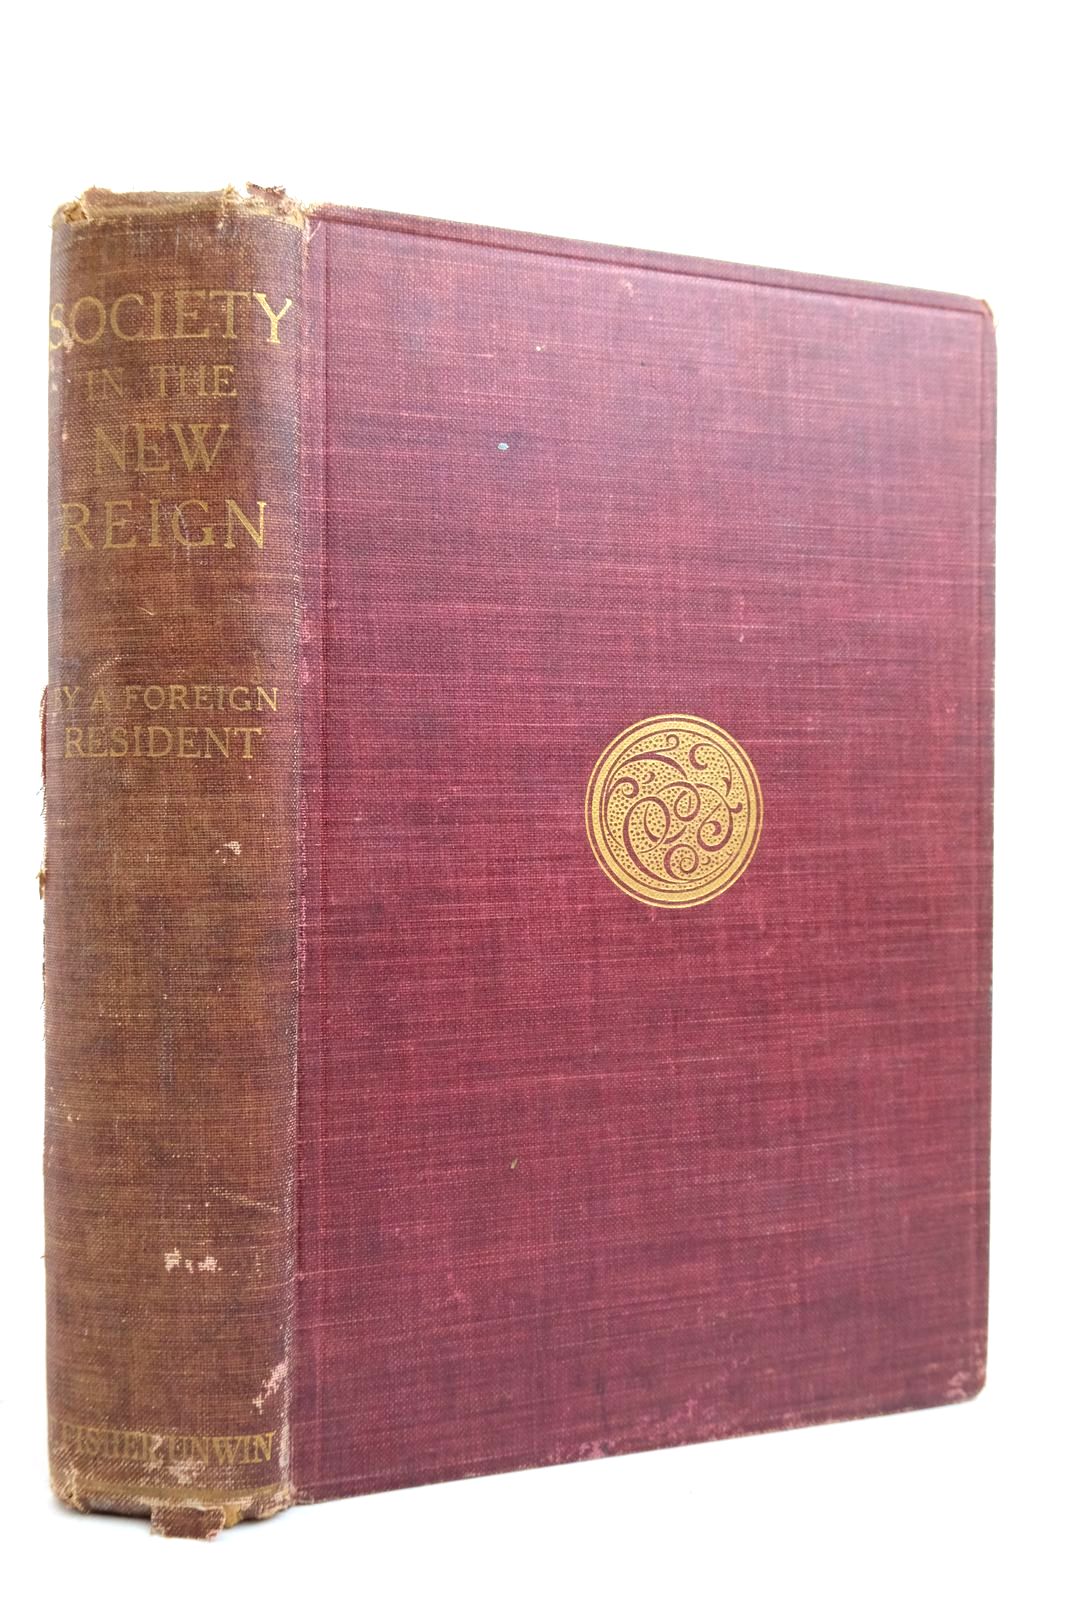 Photo of SOCIETY IN THE NEW REIGN written by Escott, T.H.S. published by T. Fisher Unwin (STOCK CODE: 2134951)  for sale by Stella & Rose's Books